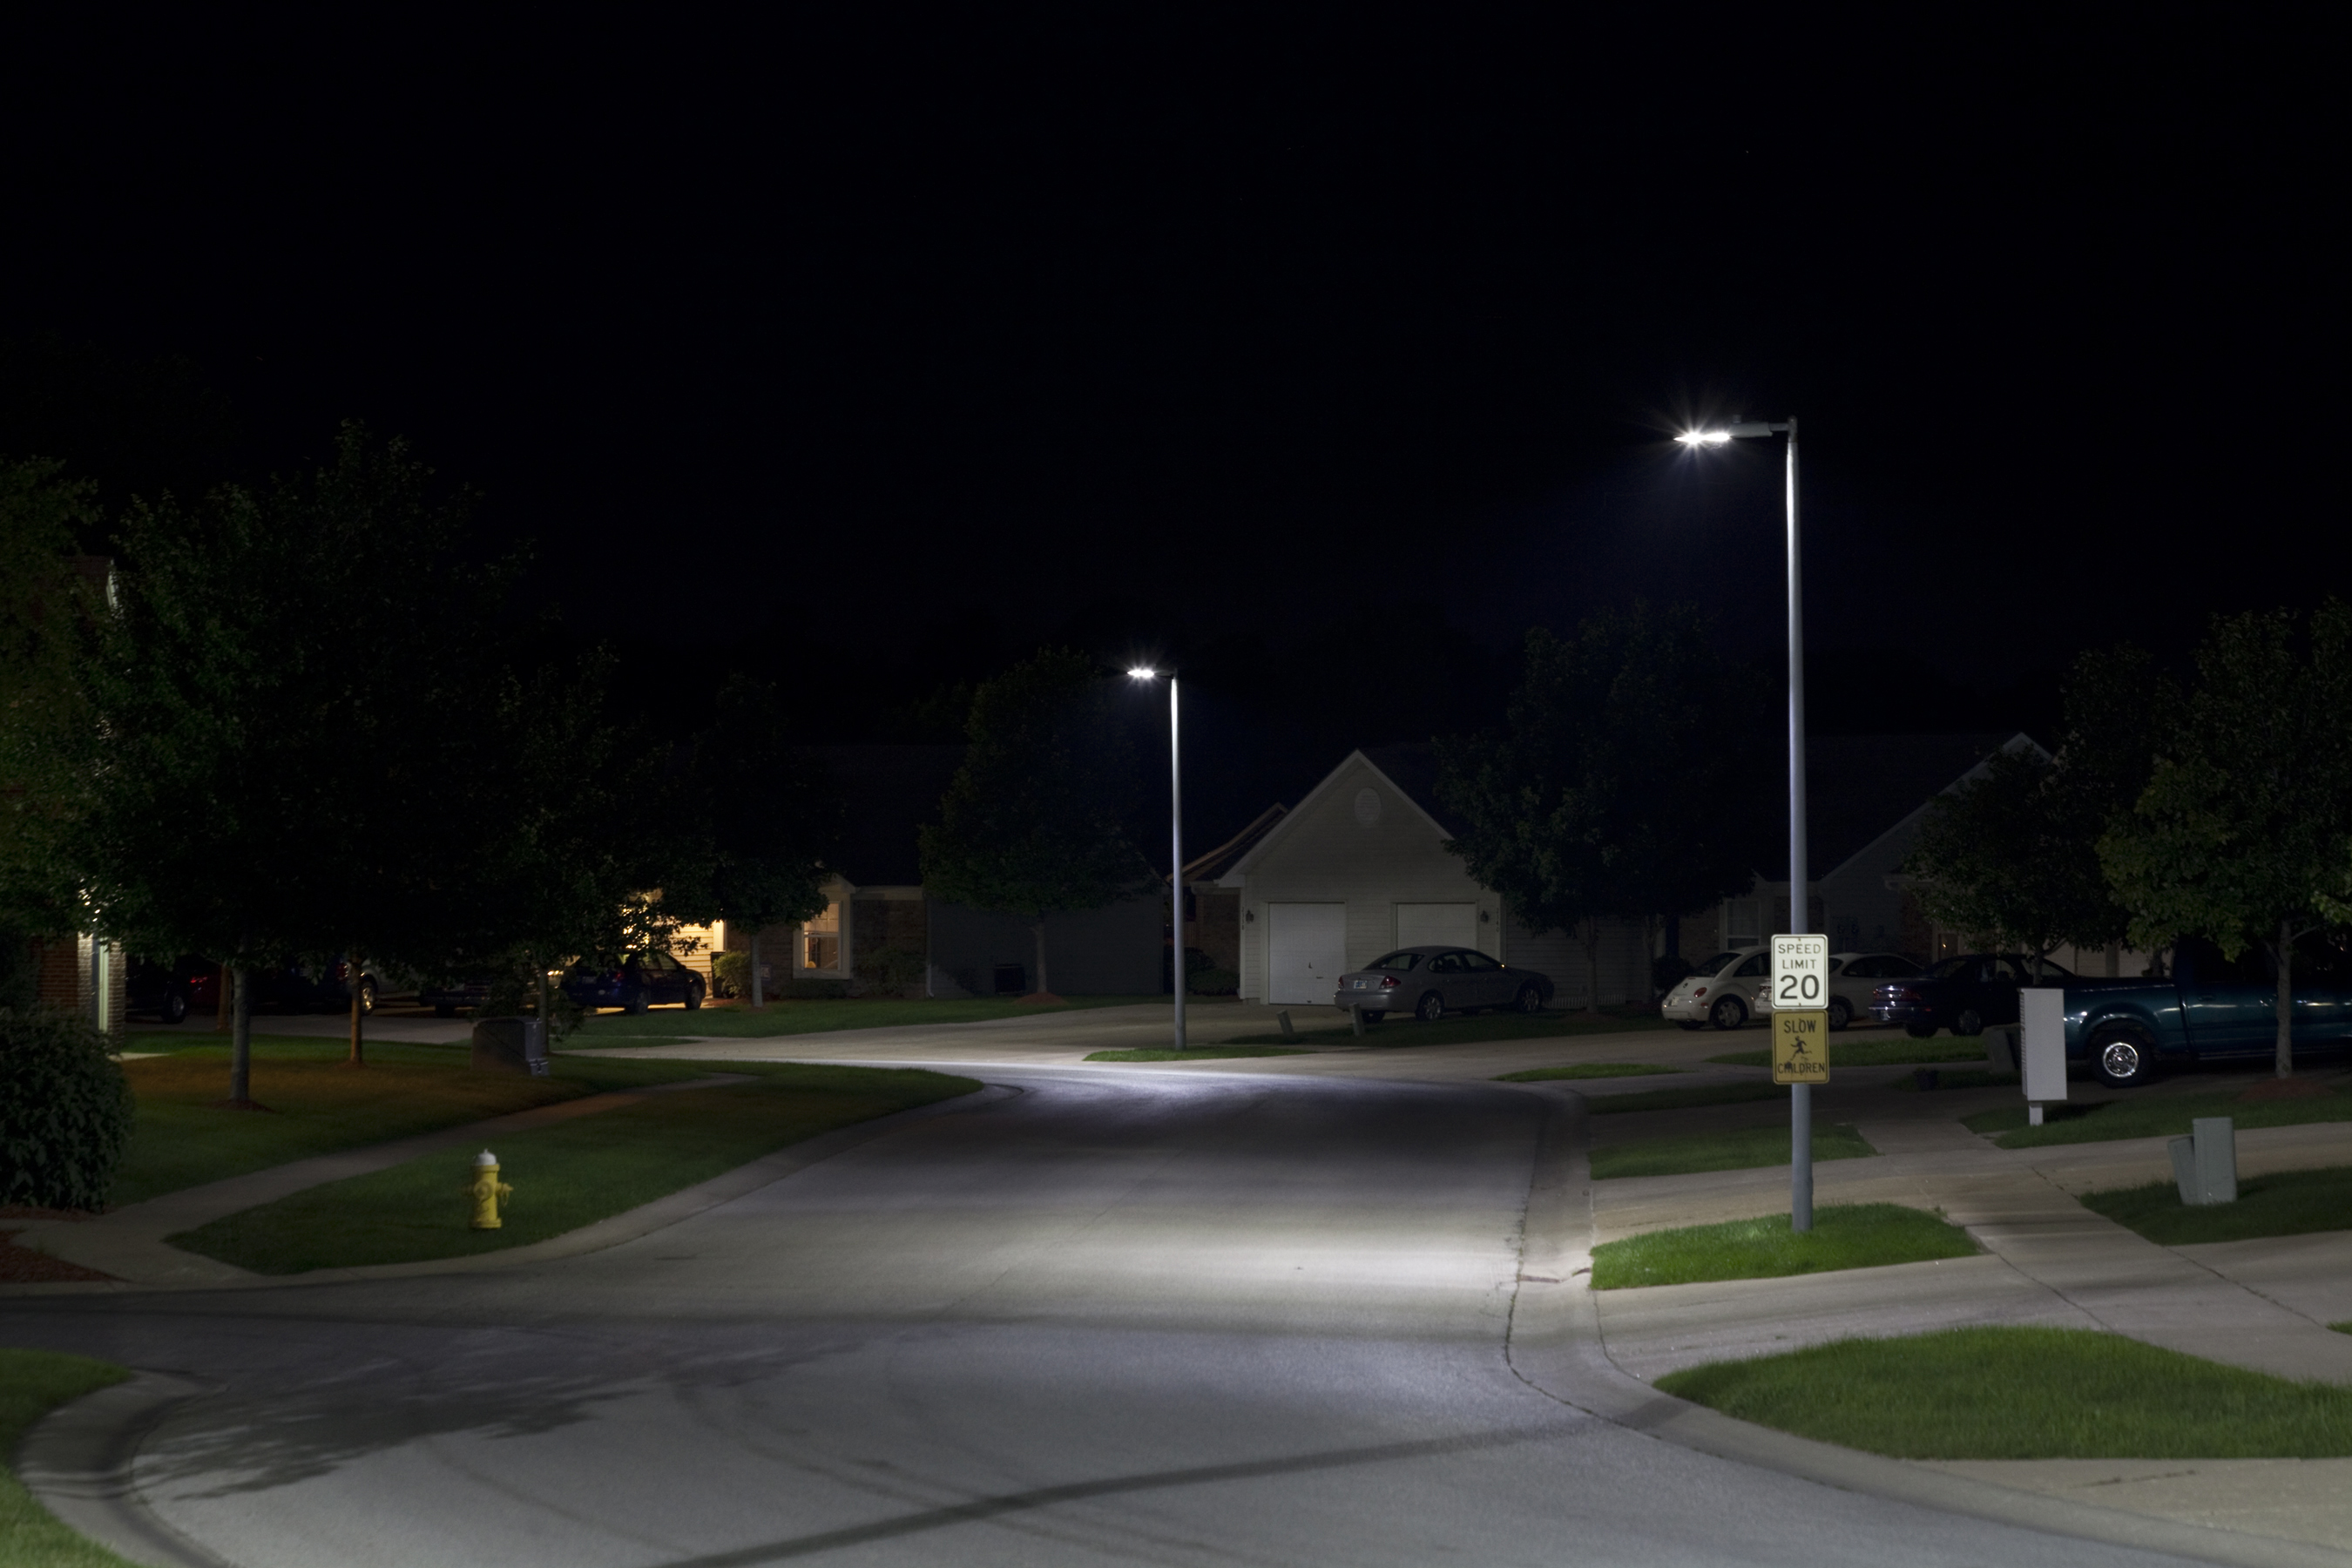 File Photo of Blue Street Lights, adapted from image ate energy.gov